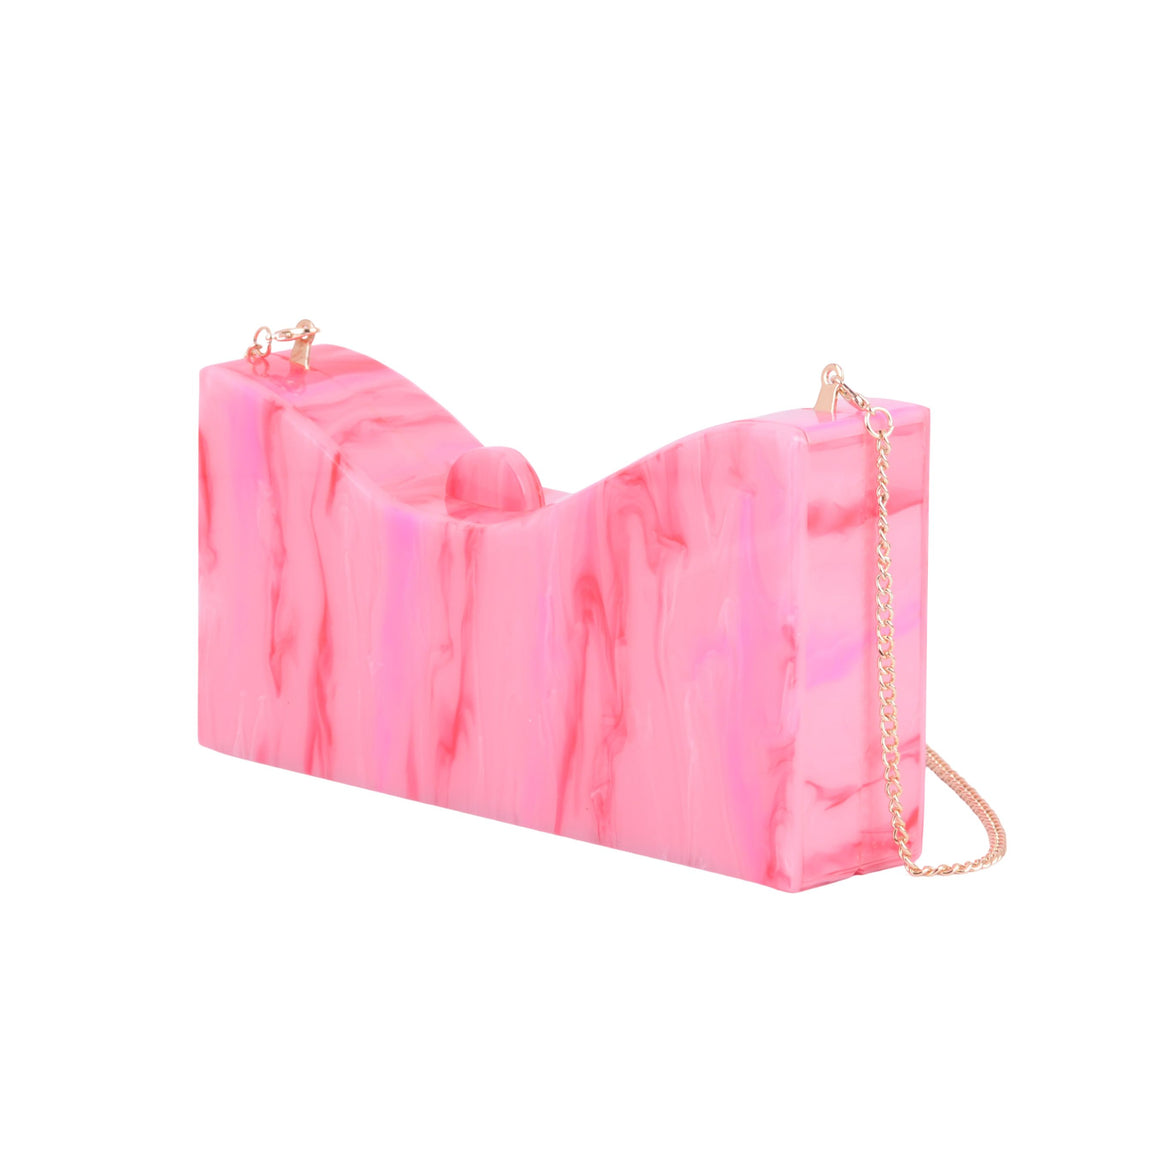 1604 - Modern Glamour: Asymmetrical Acrylic Clutch in Marble Pink with Chain Crossbody Strap